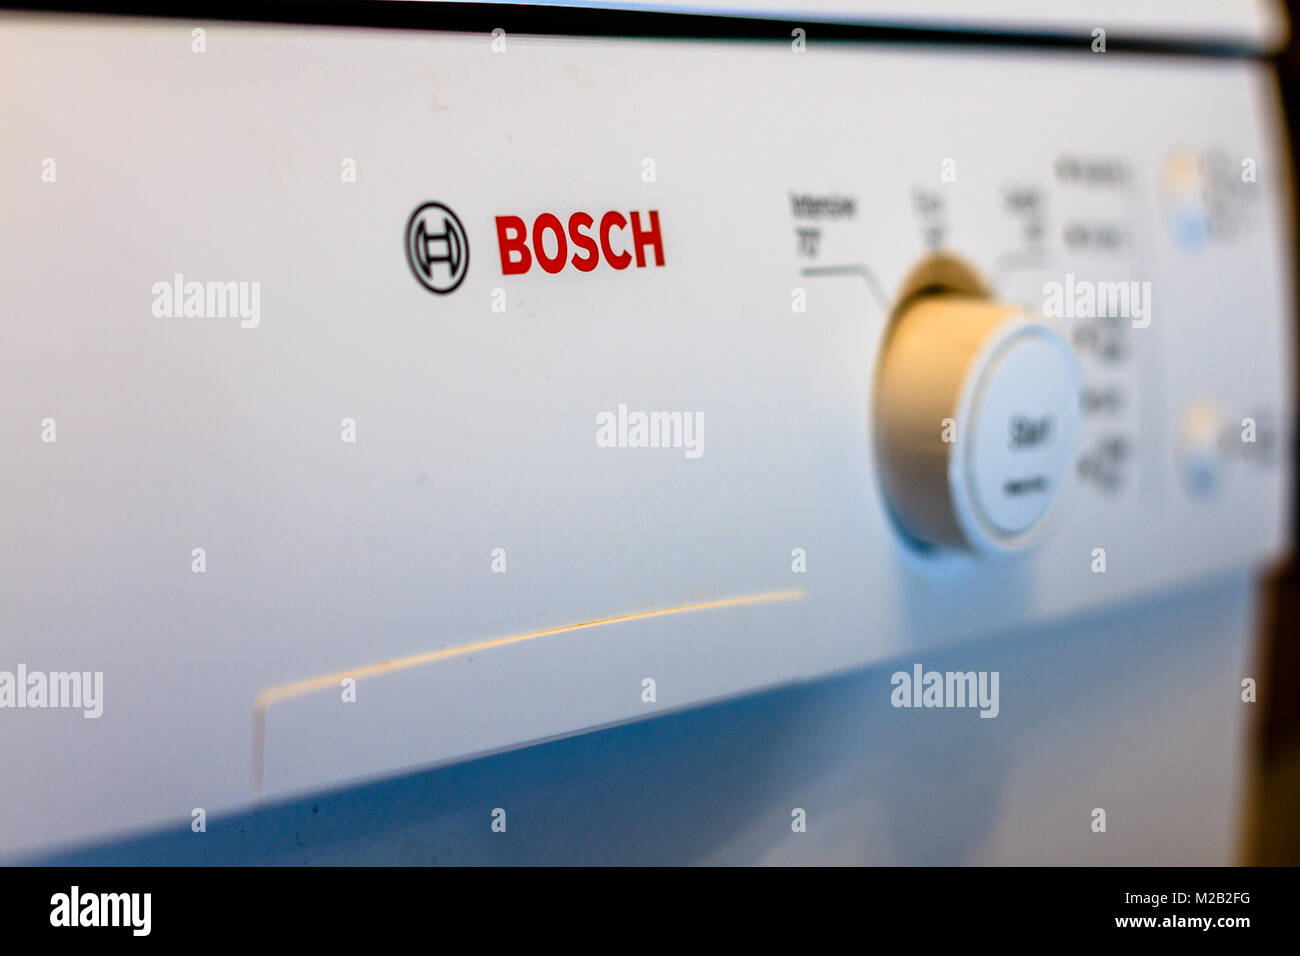 Front dials on a domestic household Bosch dishwasher appliance. February 2018. Stock Photo